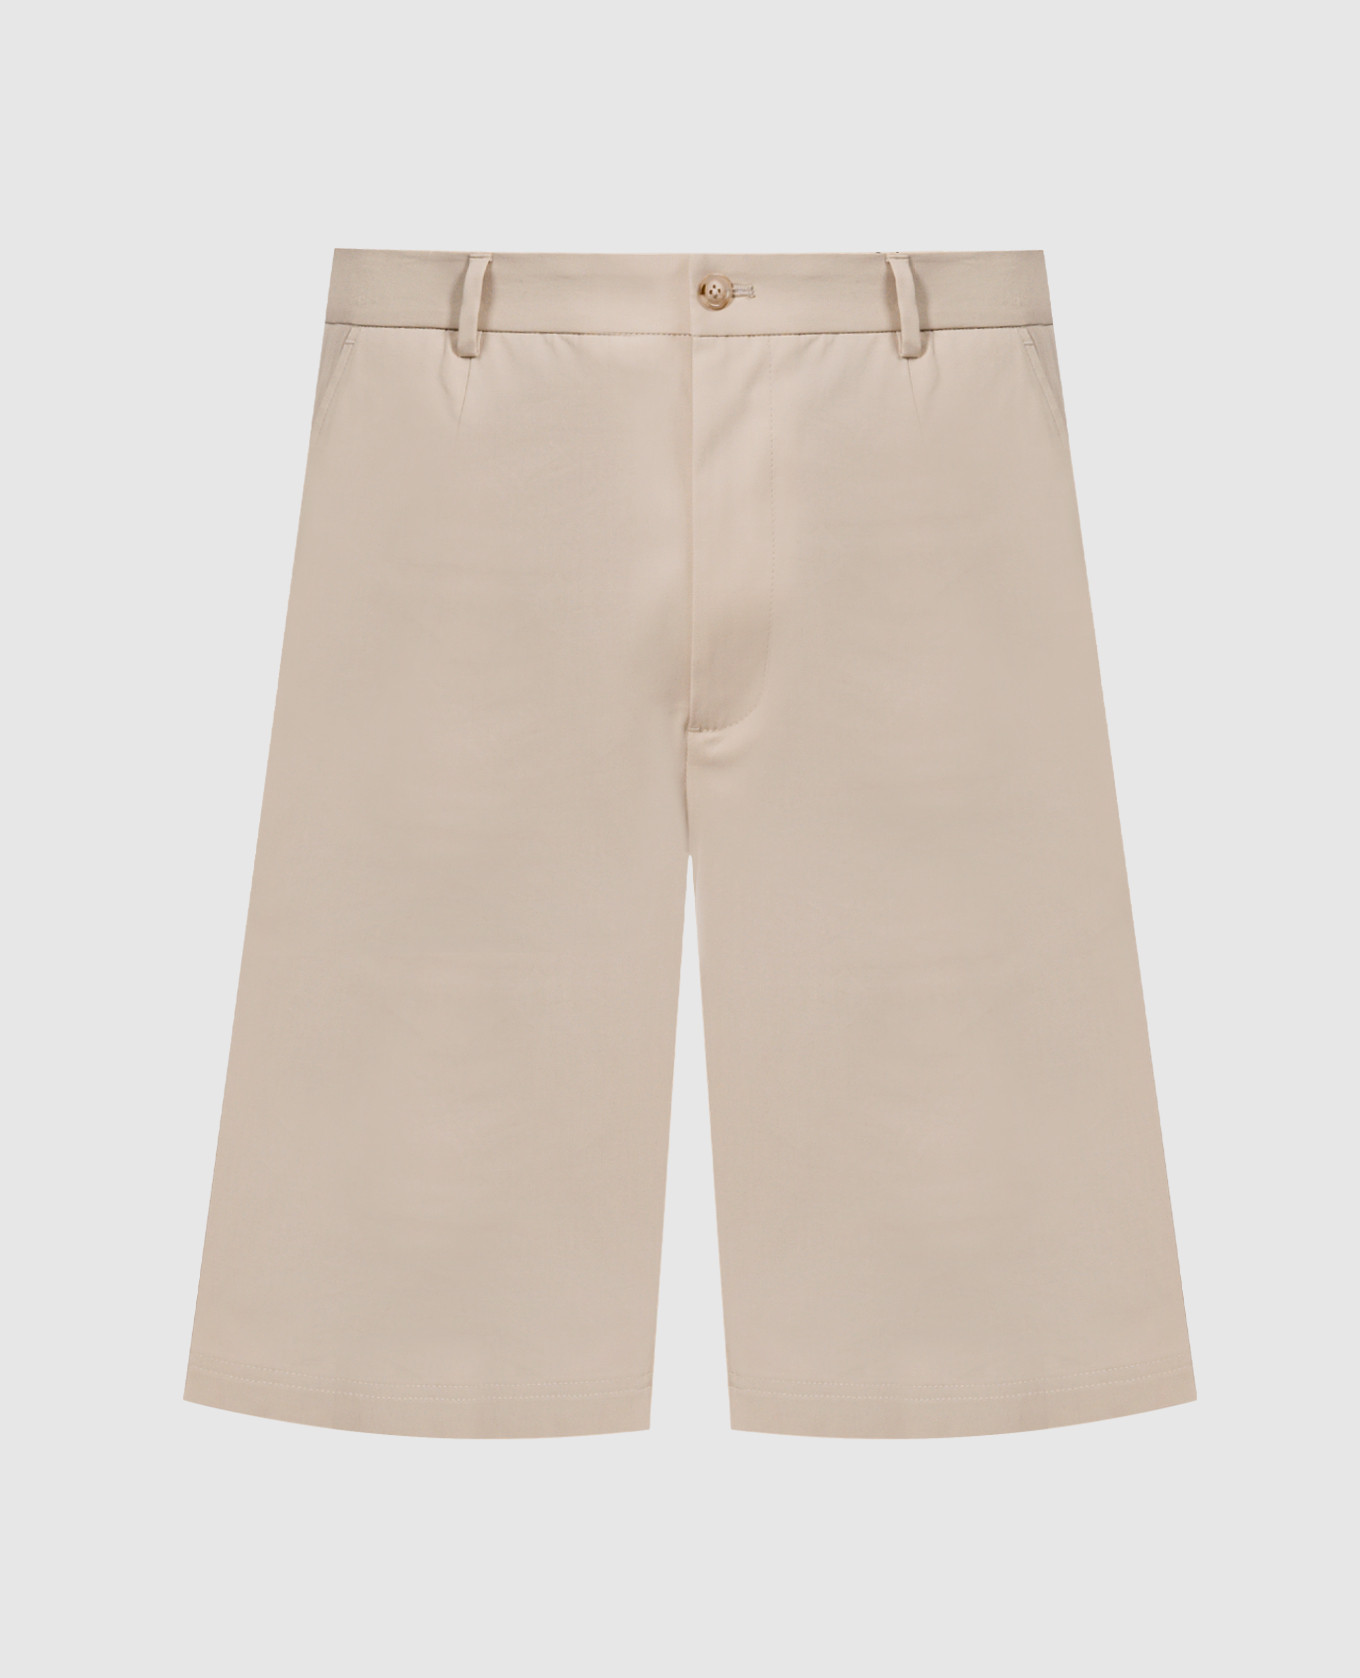 Beige shorts with logo